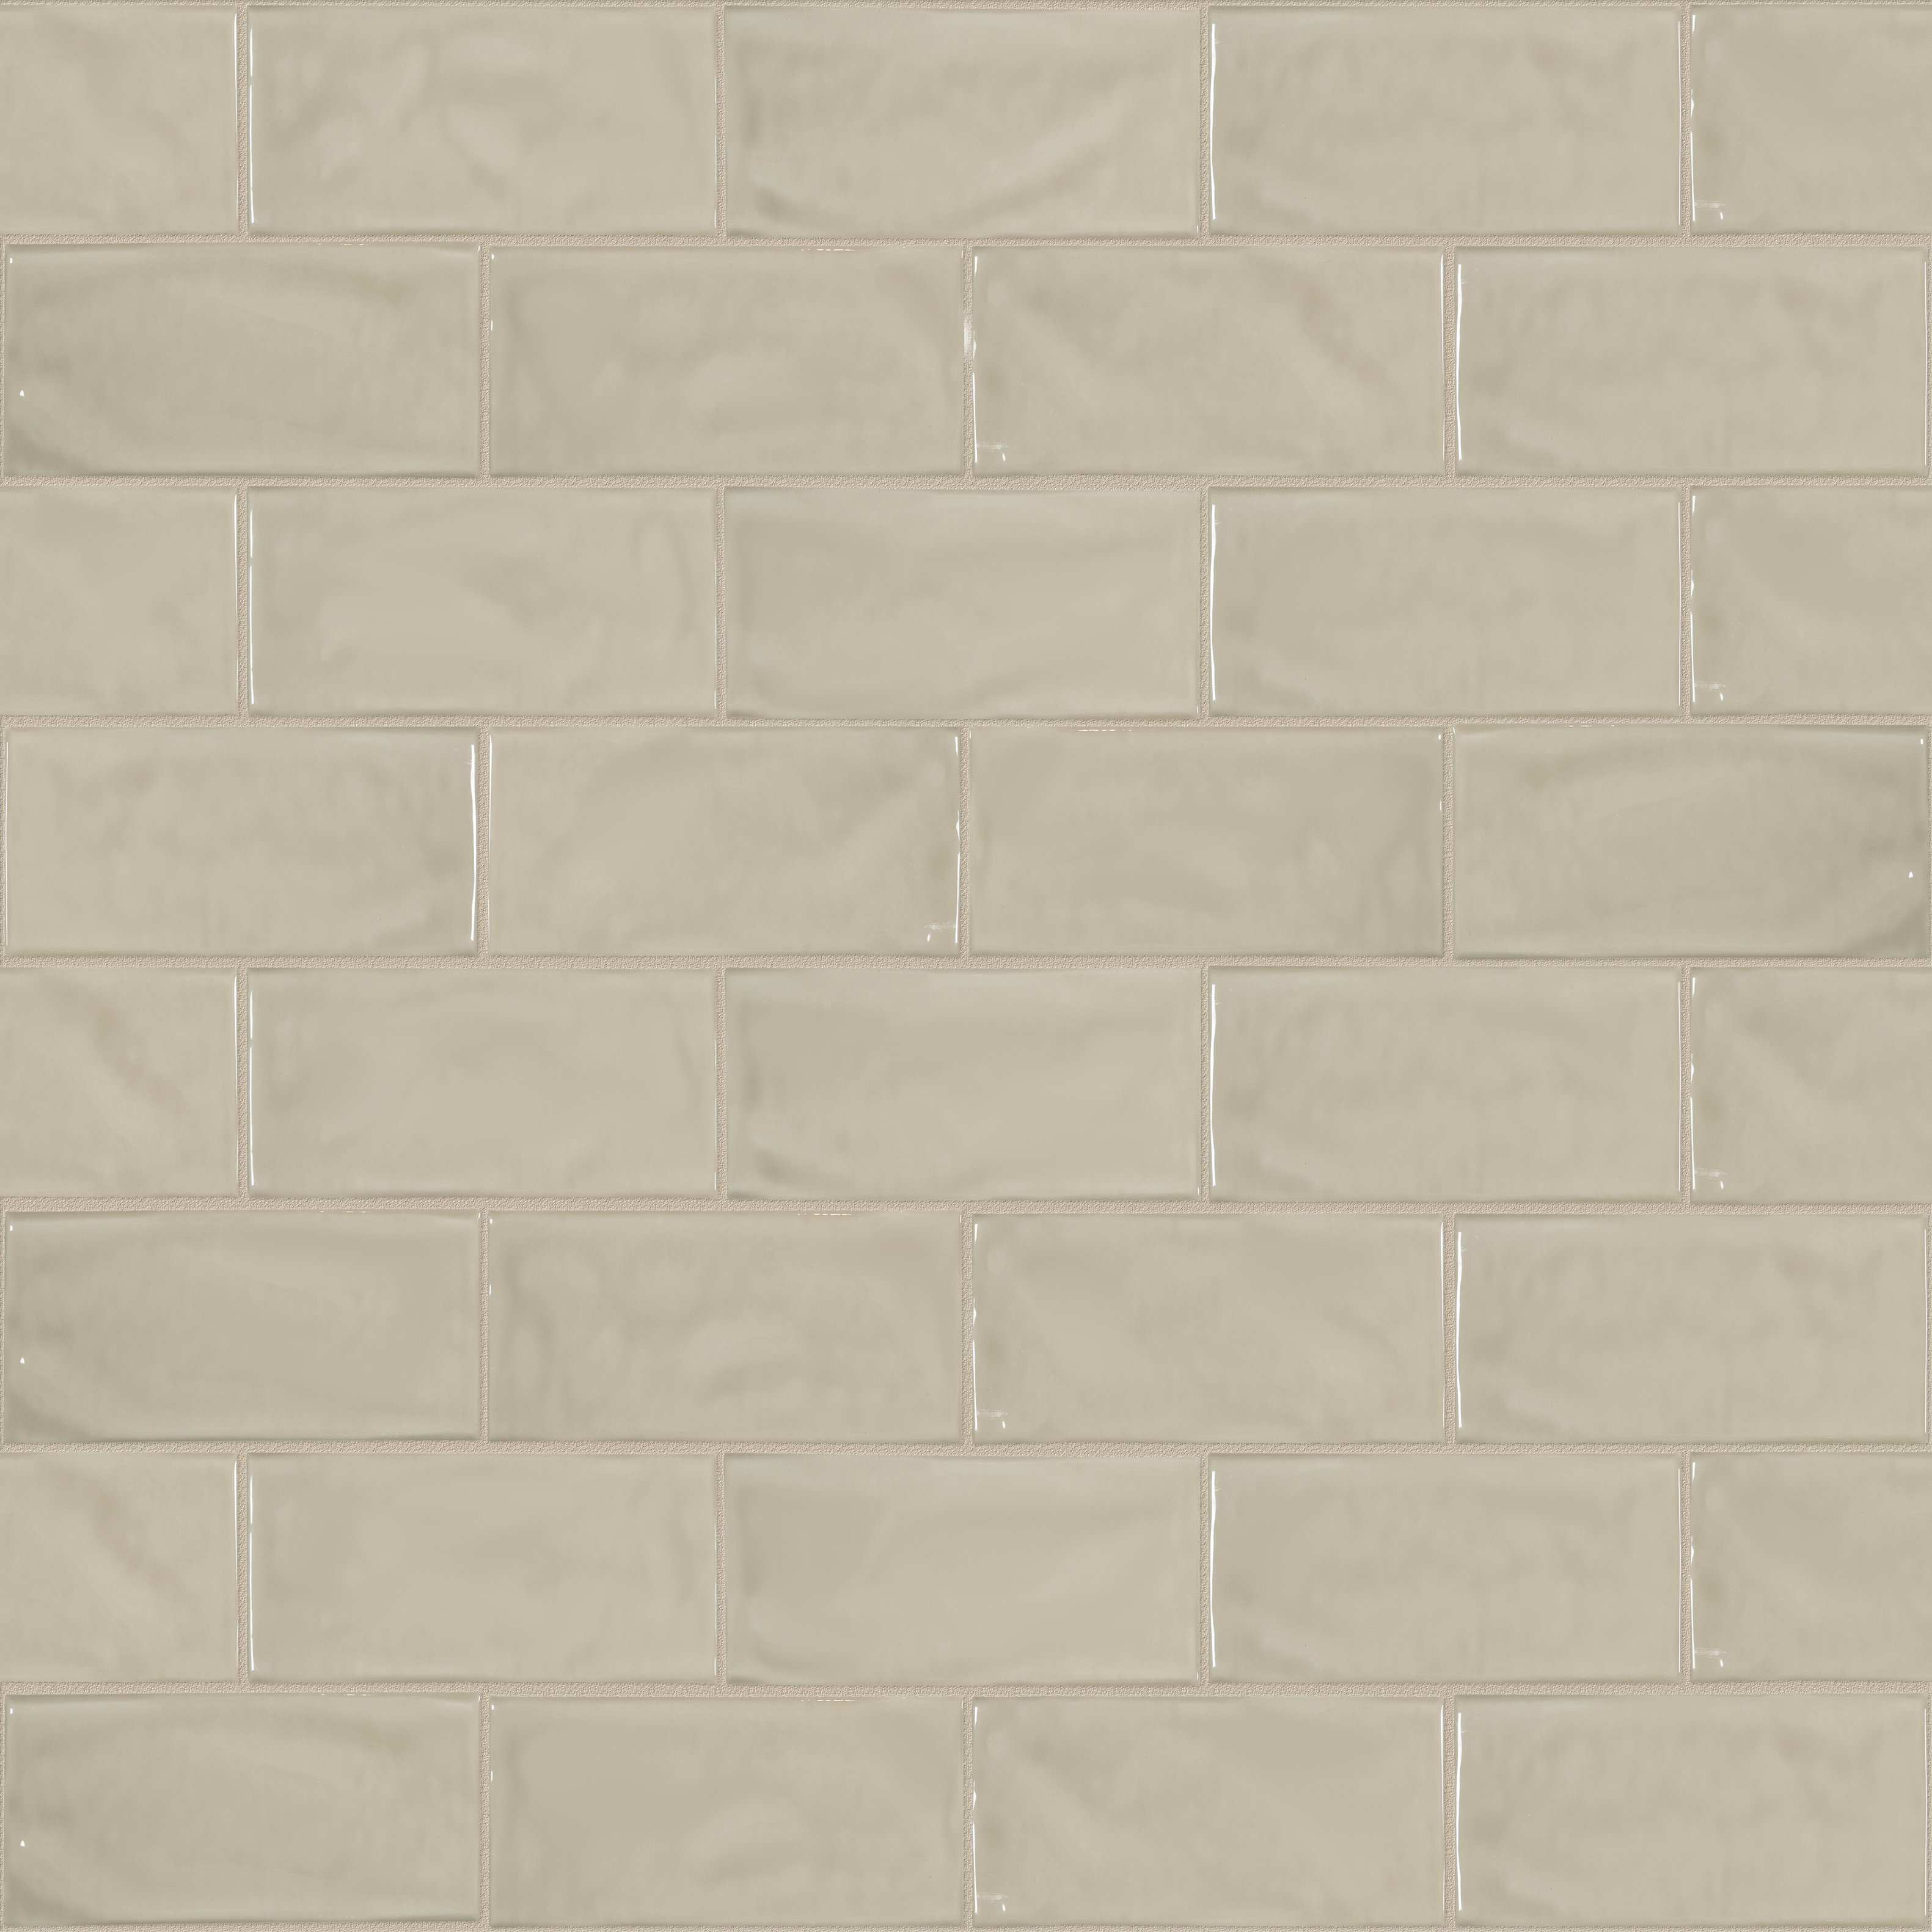 earth pattern glazed ceramic field tile from marlow anatolia collection distributed by surface group international glossy finish pressed edge 3x6 rectangle shape